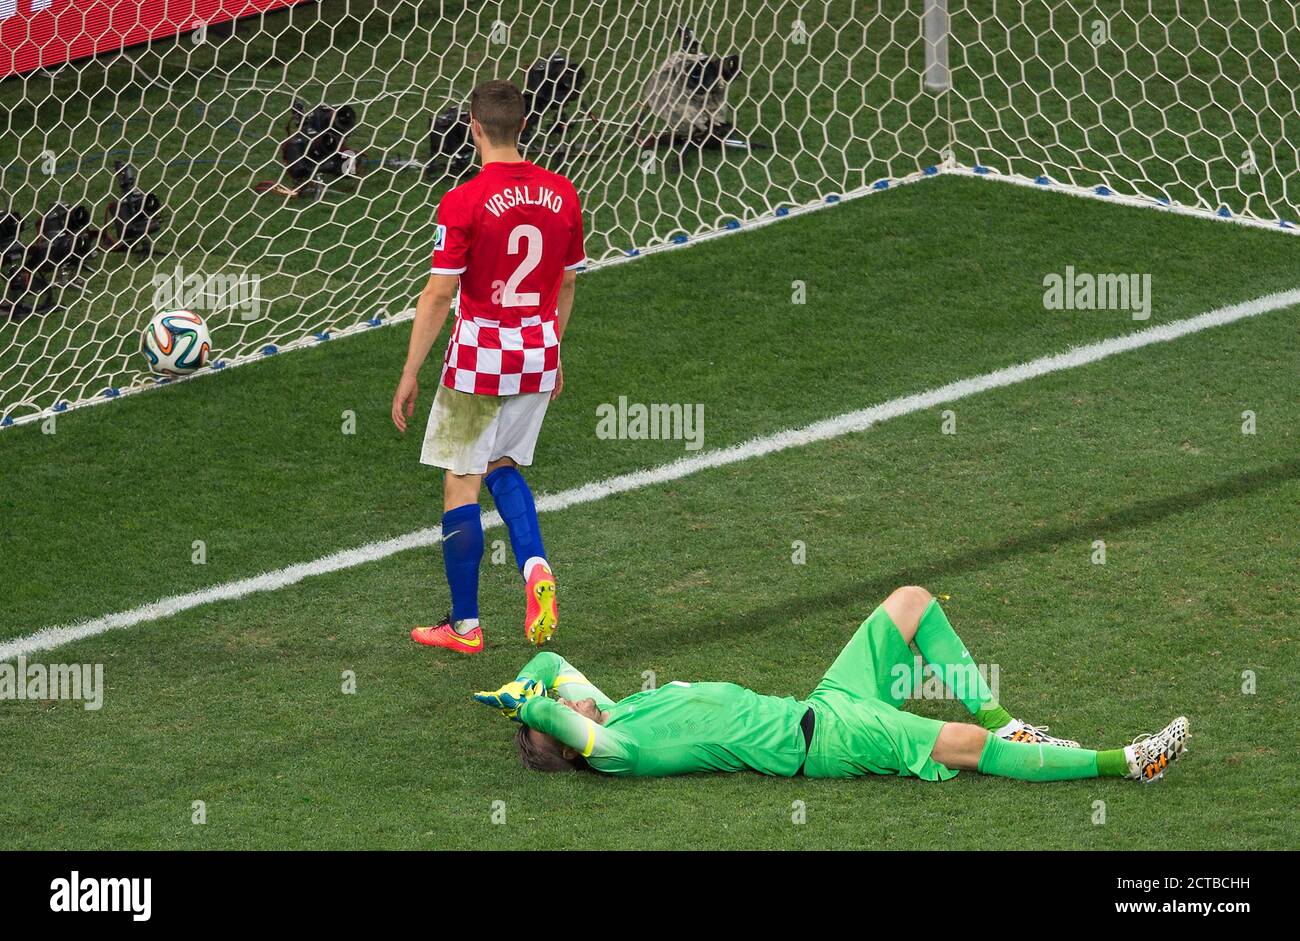 Crostian goalkeeper Pletikosa lies down and out on the floor as Oscar scores for Brazil to make it 3-1  Brazil v Croatia Brazil World Cup 2014 - Arena Stock Photo